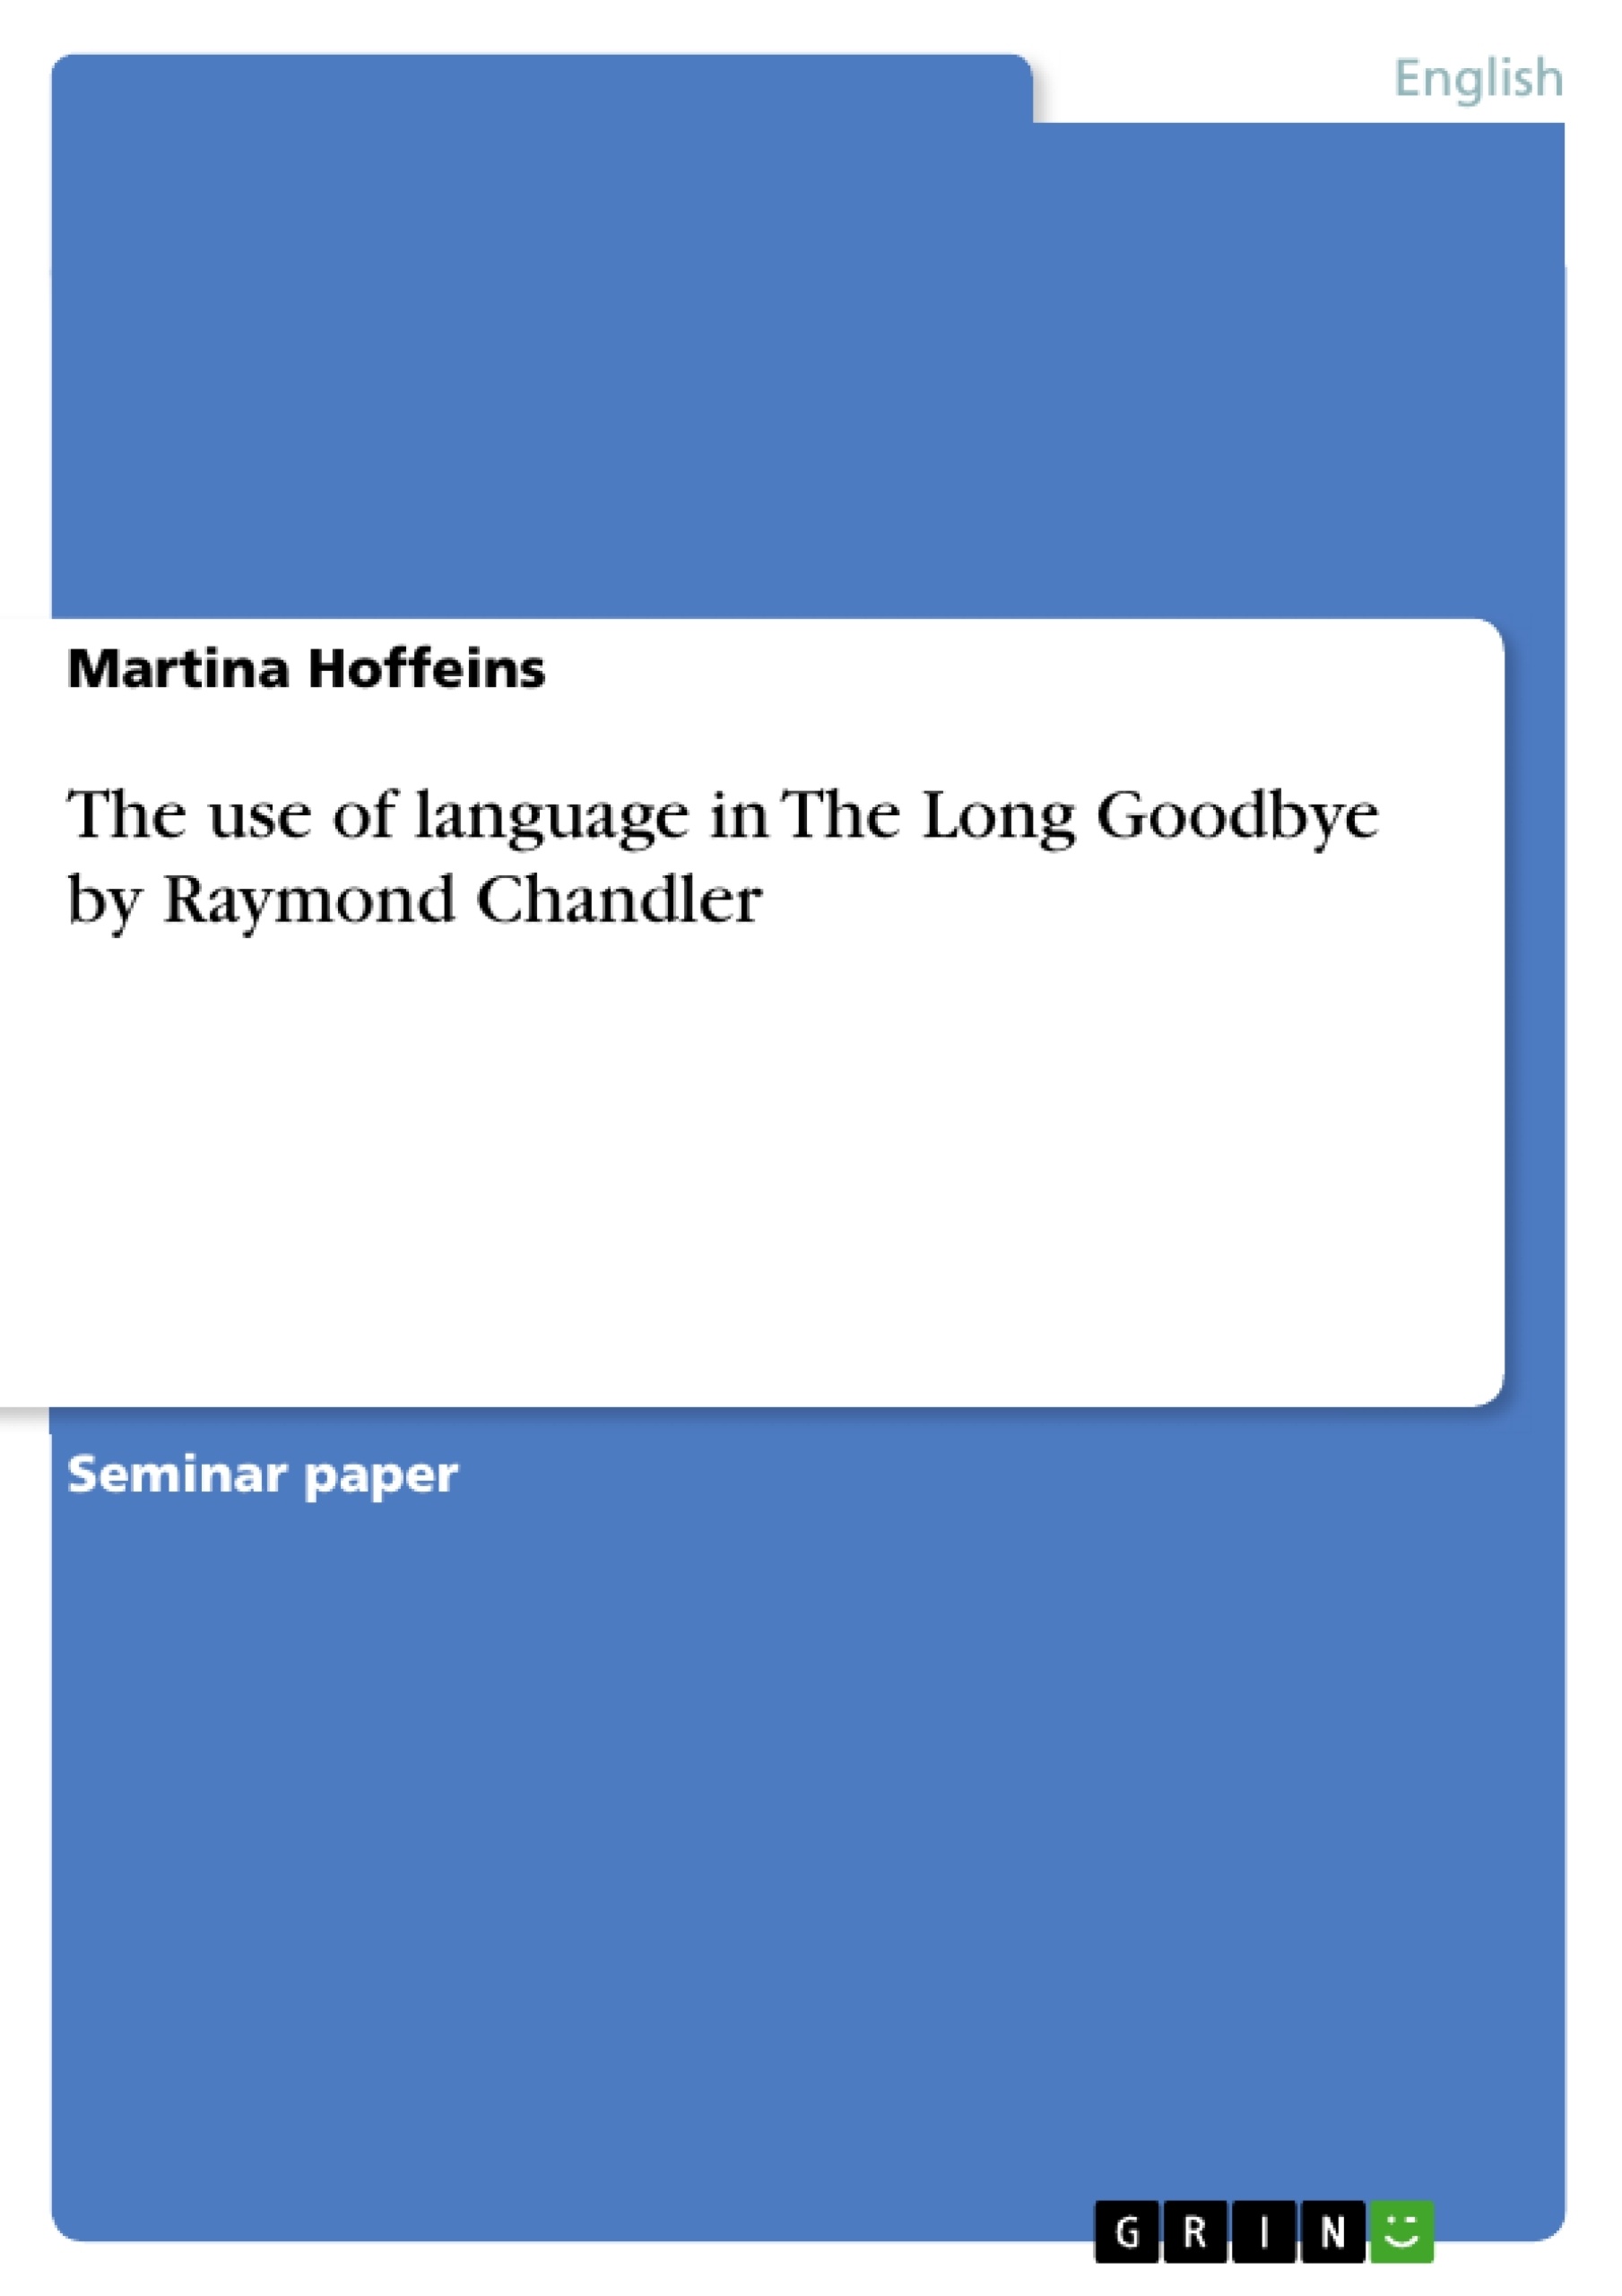 Title: The use of language in The Long Goodbye by Raymond Chandler